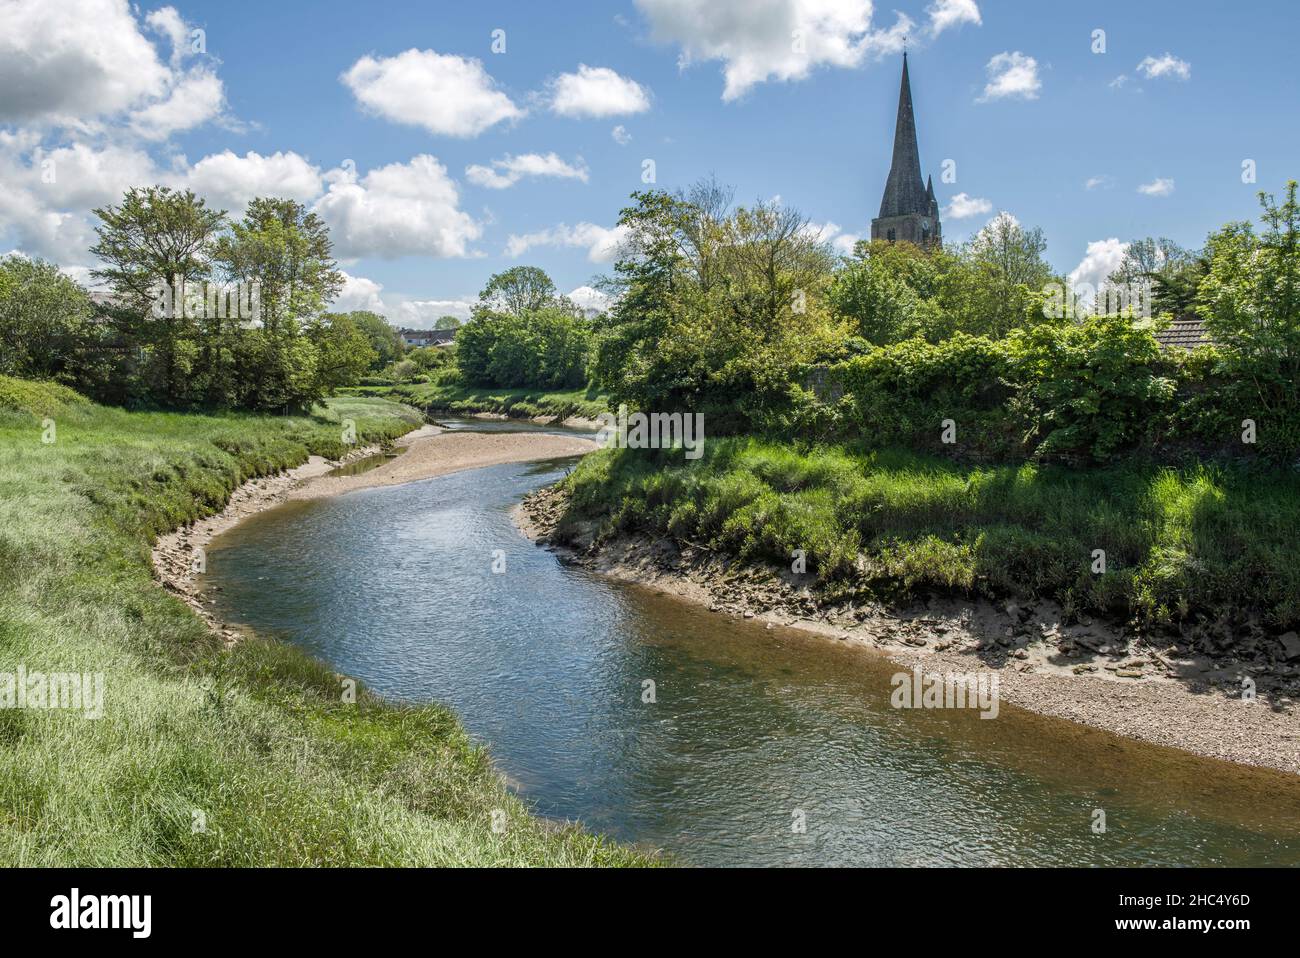 The River, Or Afon, Gwendraeth, working its way through the Carmarthenshire village of Kidwelly (in welsh, Cydweli) Stock Photo